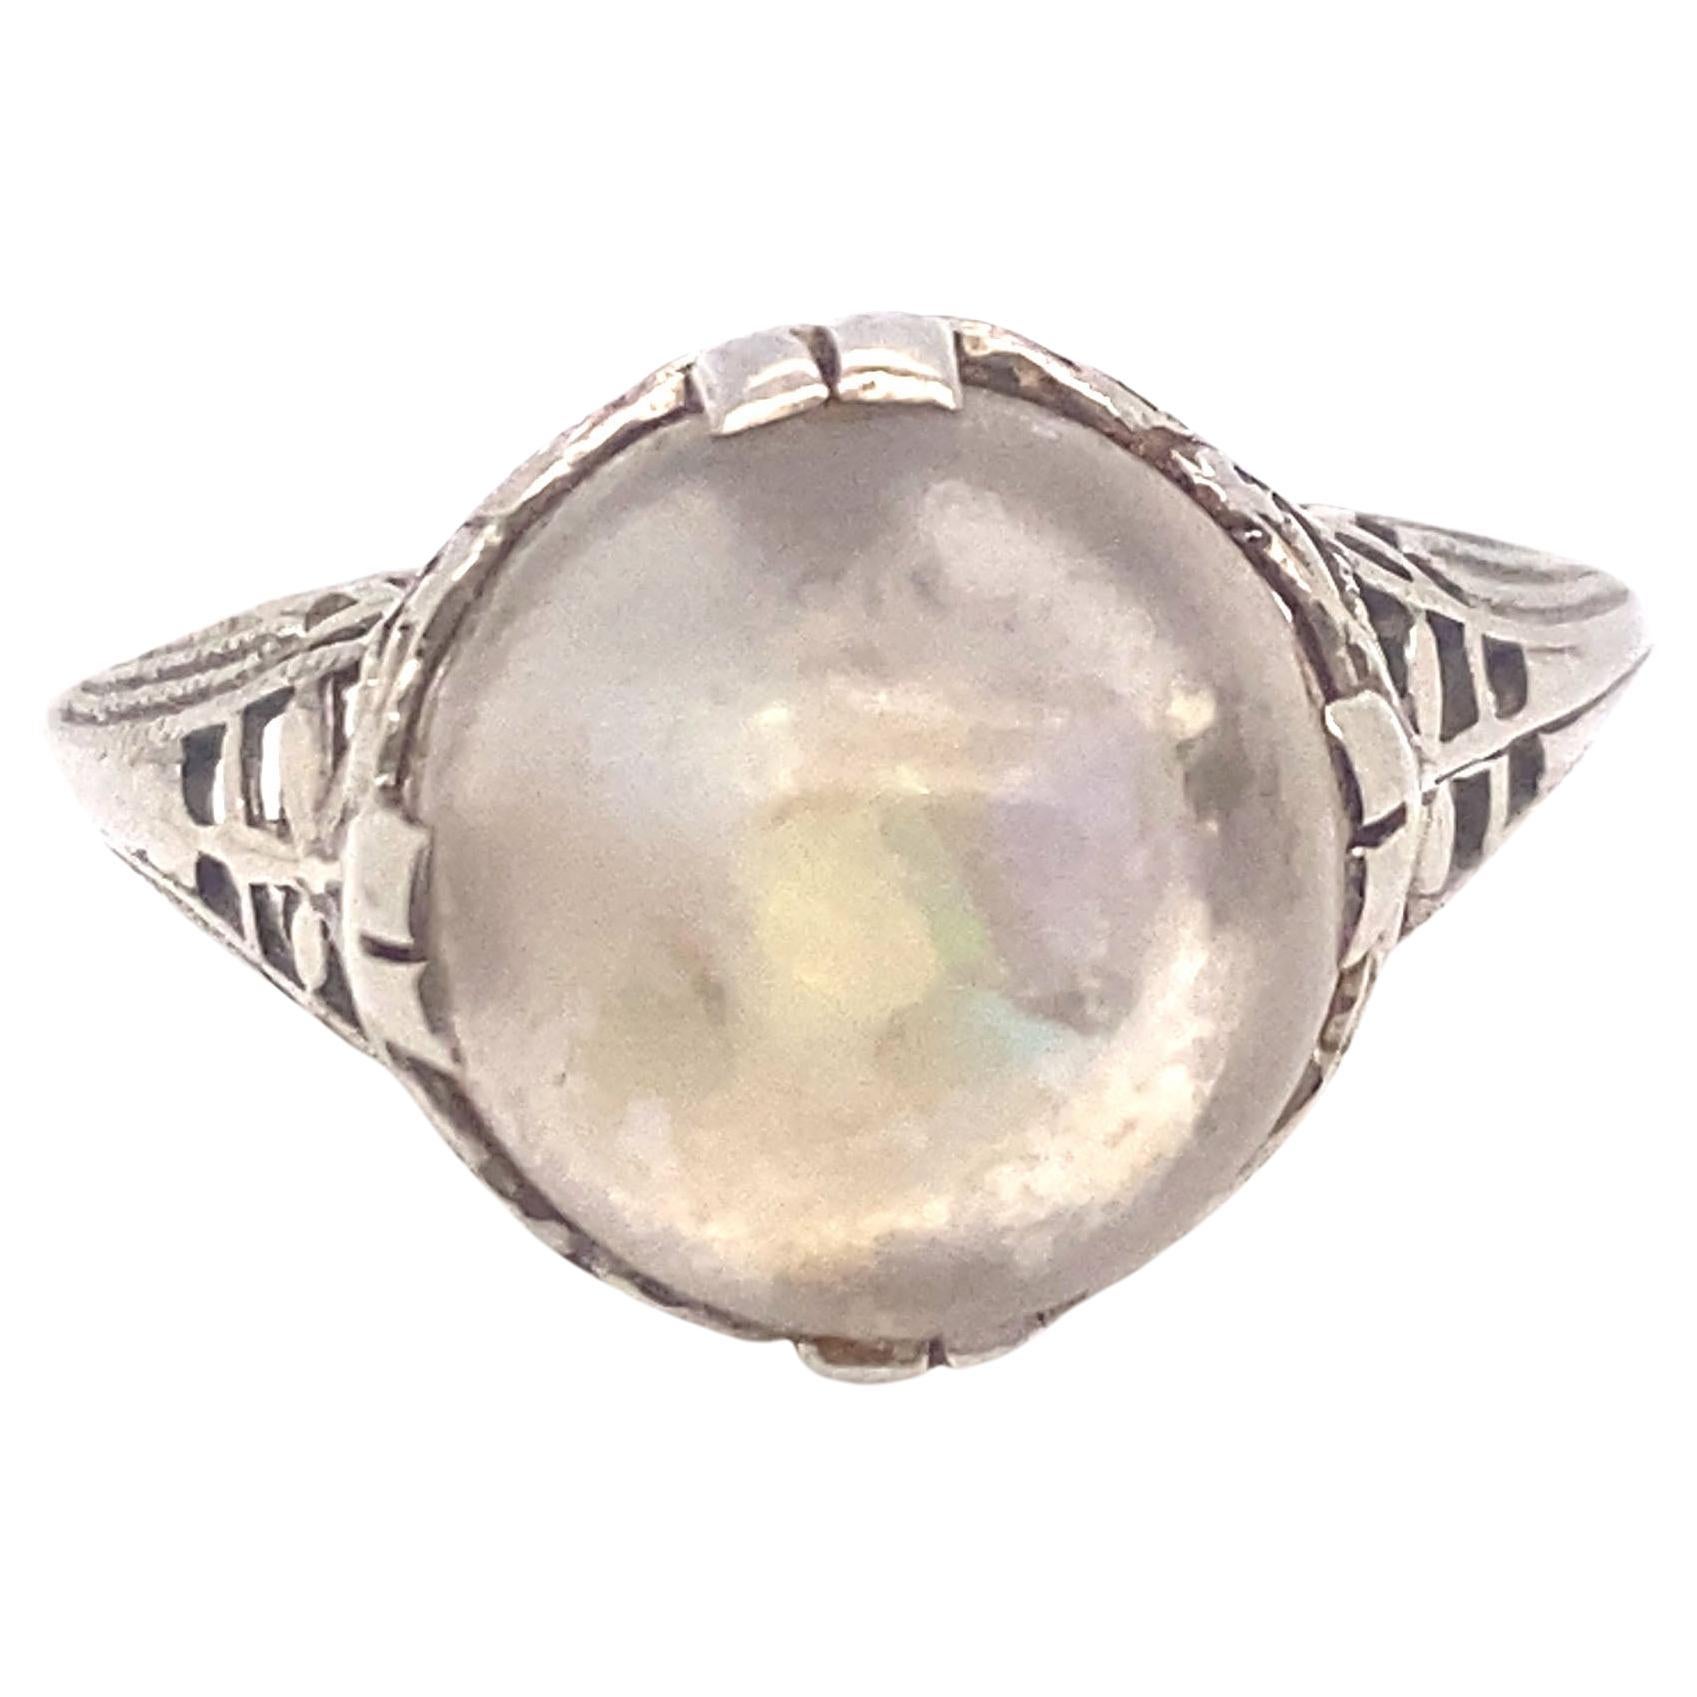 How much is an opal worth?